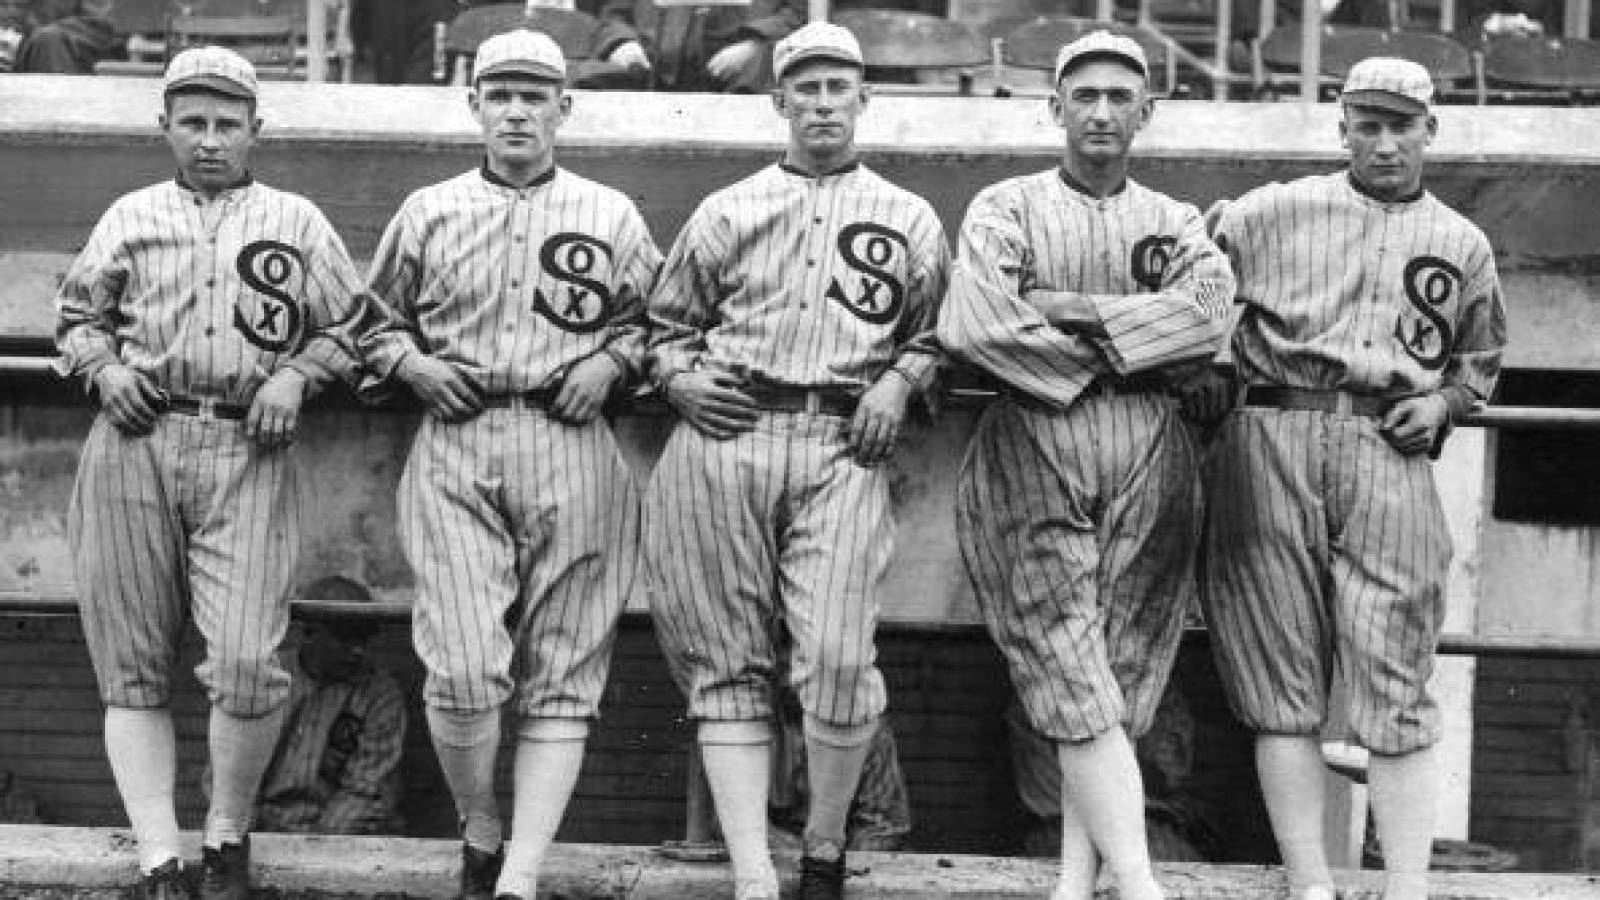 About the 1919 World Series Scandal - Clear Buck Weaver